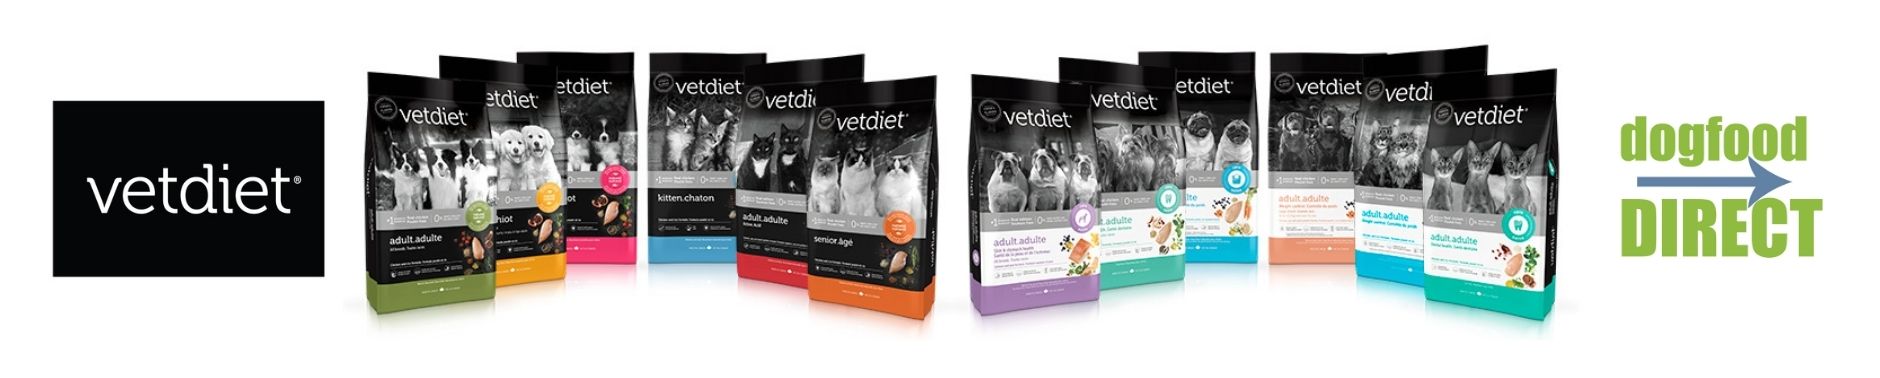 Vetdiet high quality natural food for lifelong pet health Dog Food Direct